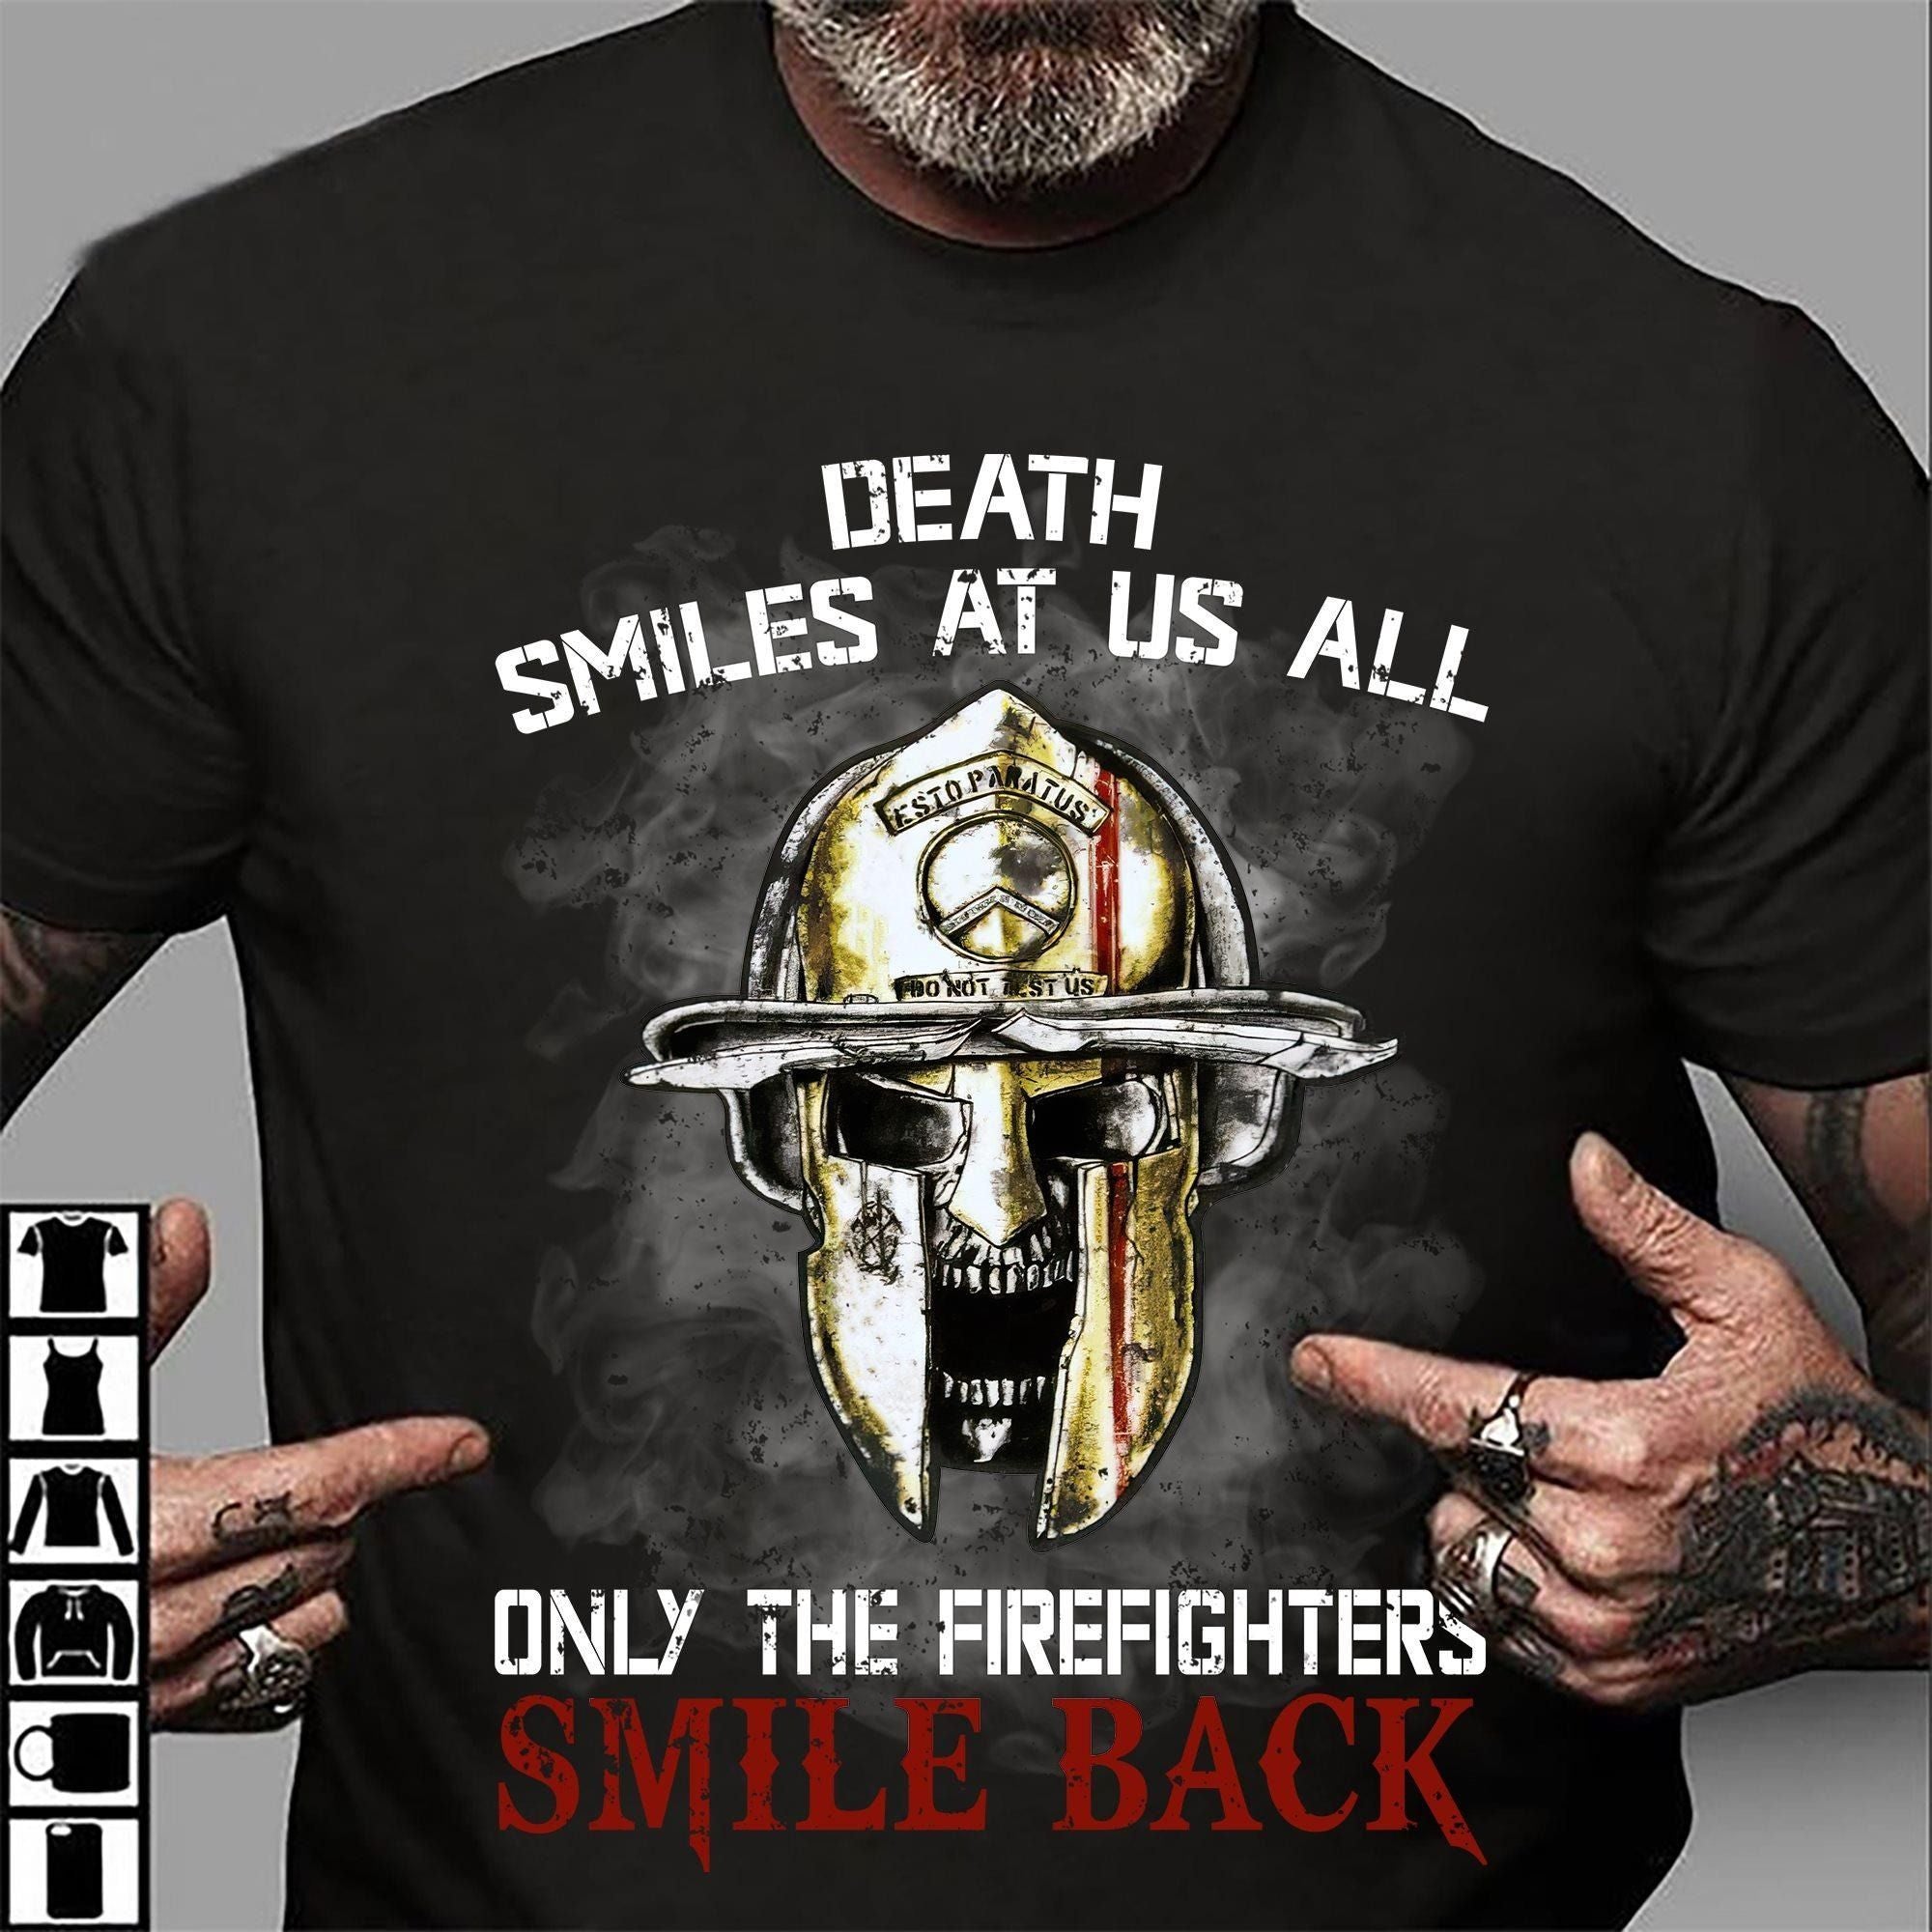 PresentsPrints, Firefighters death smiles at us all only the firefighters smile back Tshirt Hoodie Sweater 